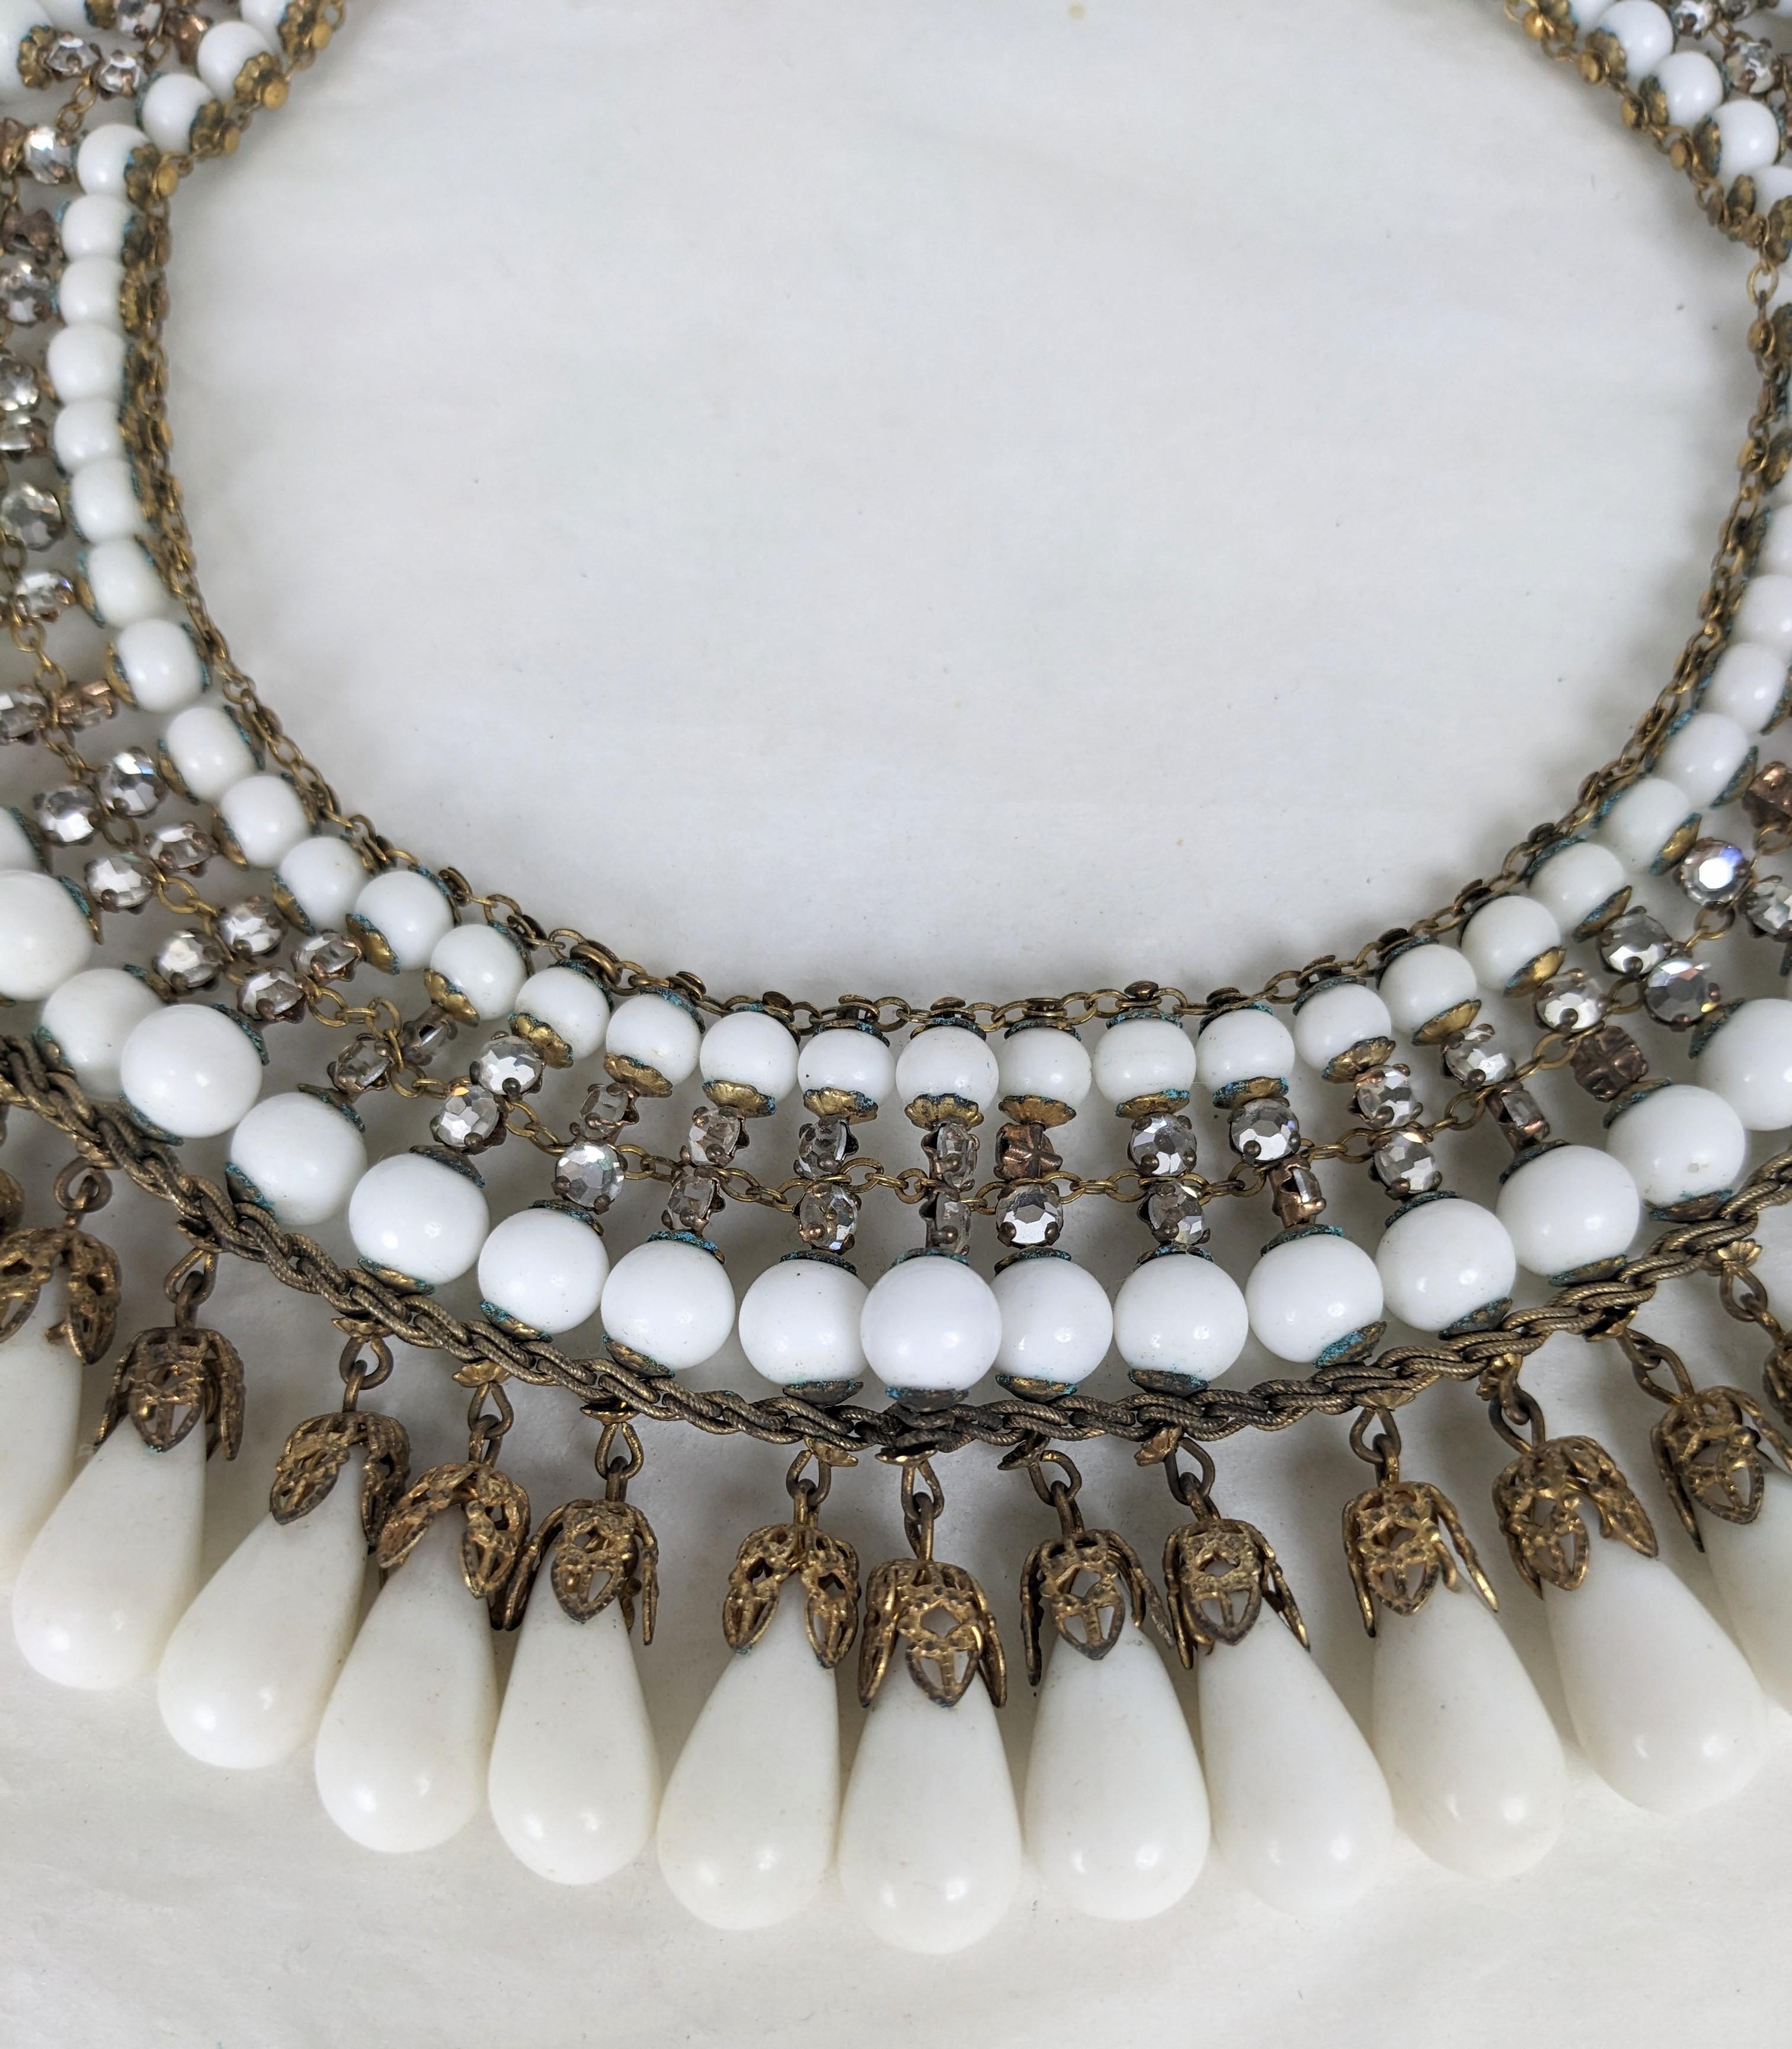 Women's Miriam Haskell Milk Glass Pave Collar For Sale